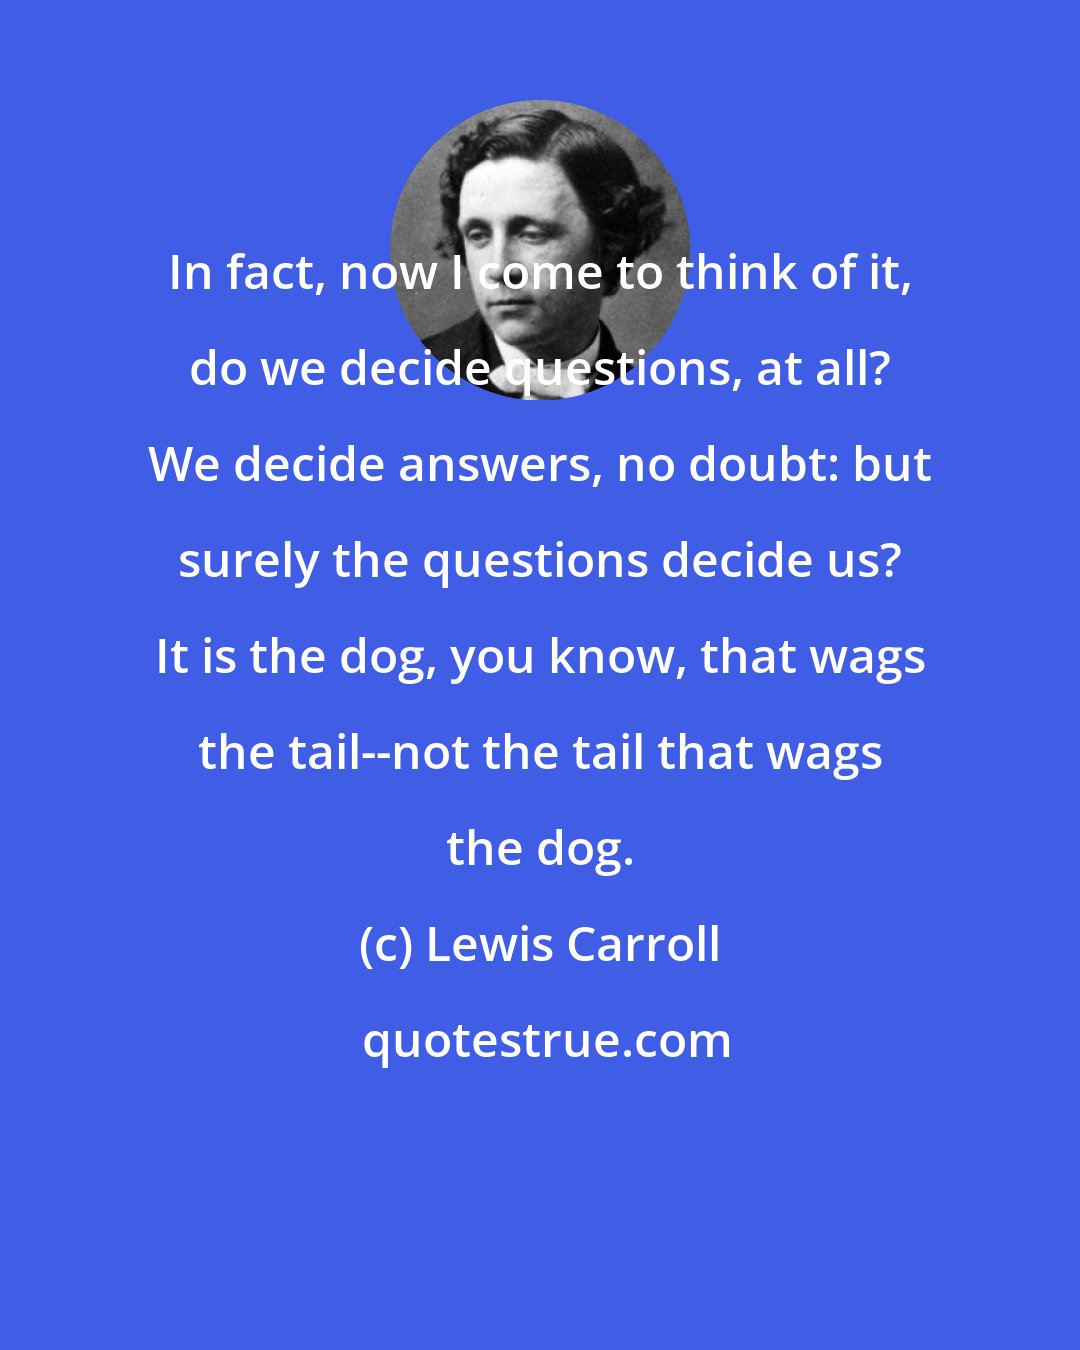 Lewis Carroll: In fact, now I come to think of it, do we decide questions, at all? We decide answers, no doubt: but surely the questions decide us? It is the dog, you know, that wags the tail--not the tail that wags the dog.